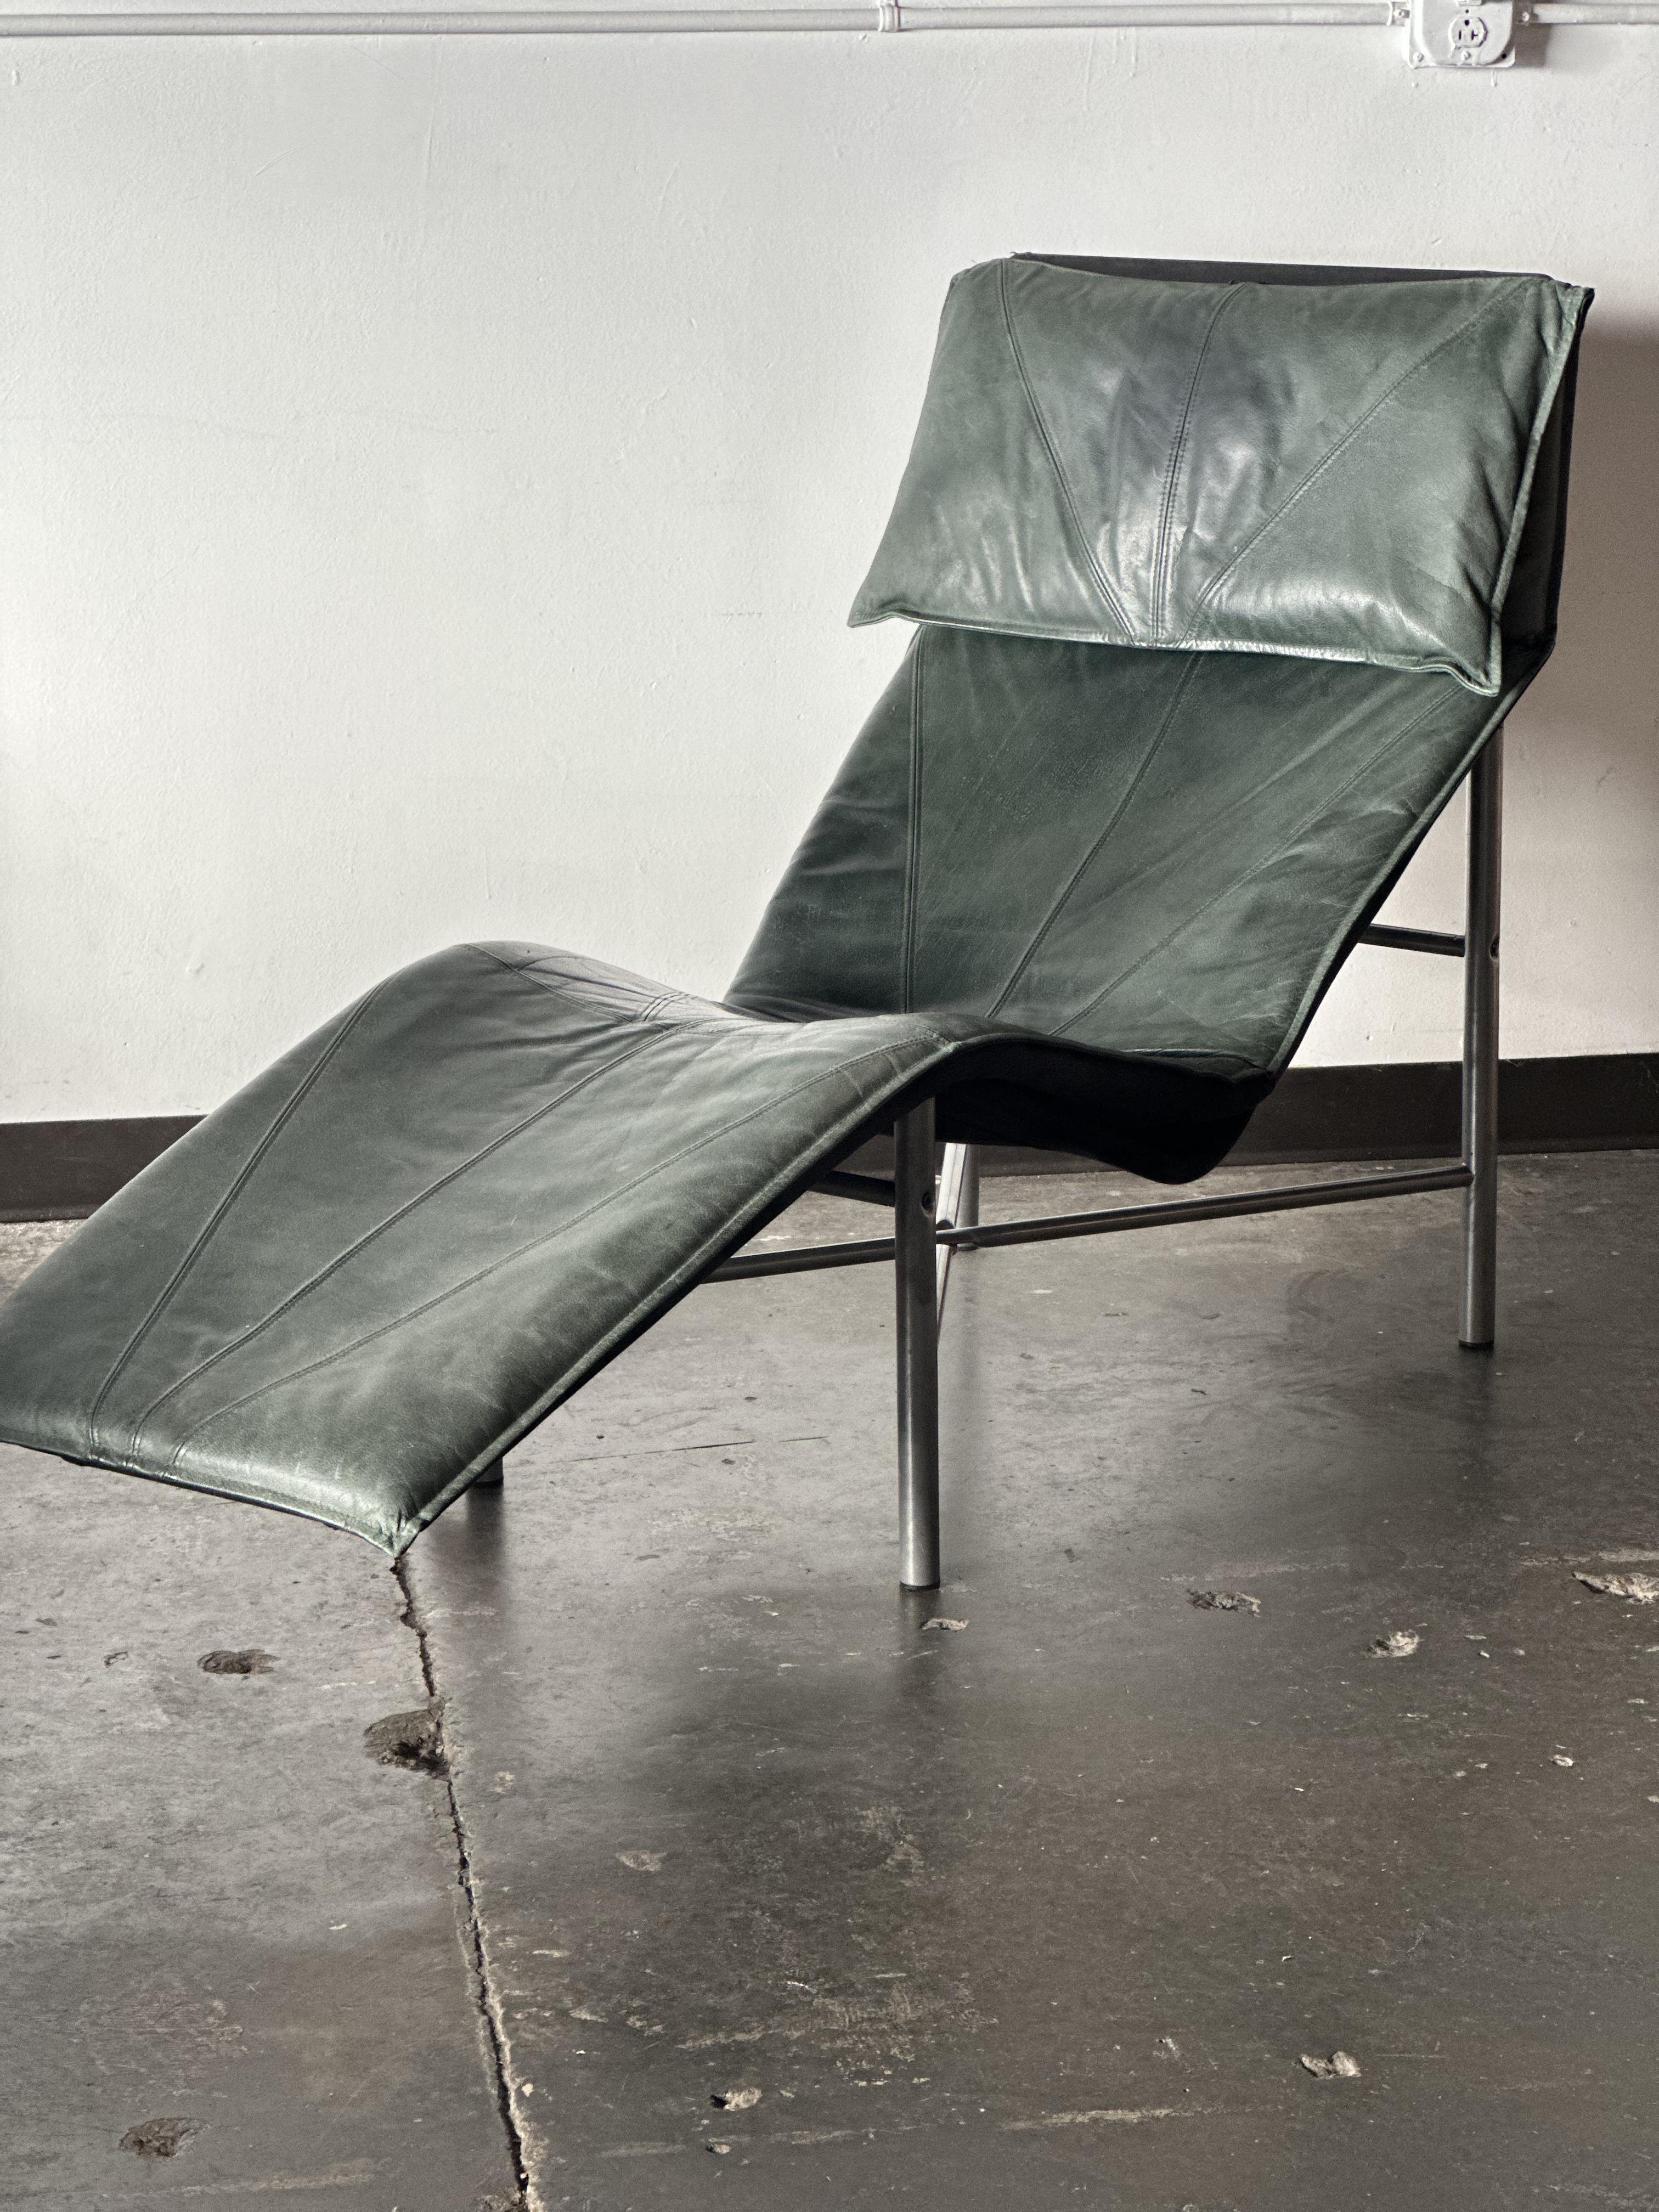 Skye Lounge by Tord Bjorklund for Ikea as documented in the Ikea 1990 catalog. Features a dark green leather cushion situated on a black canvas sling affixed to a silver metal tubular frame. Leather has slight patina from previous life. 

Lounge